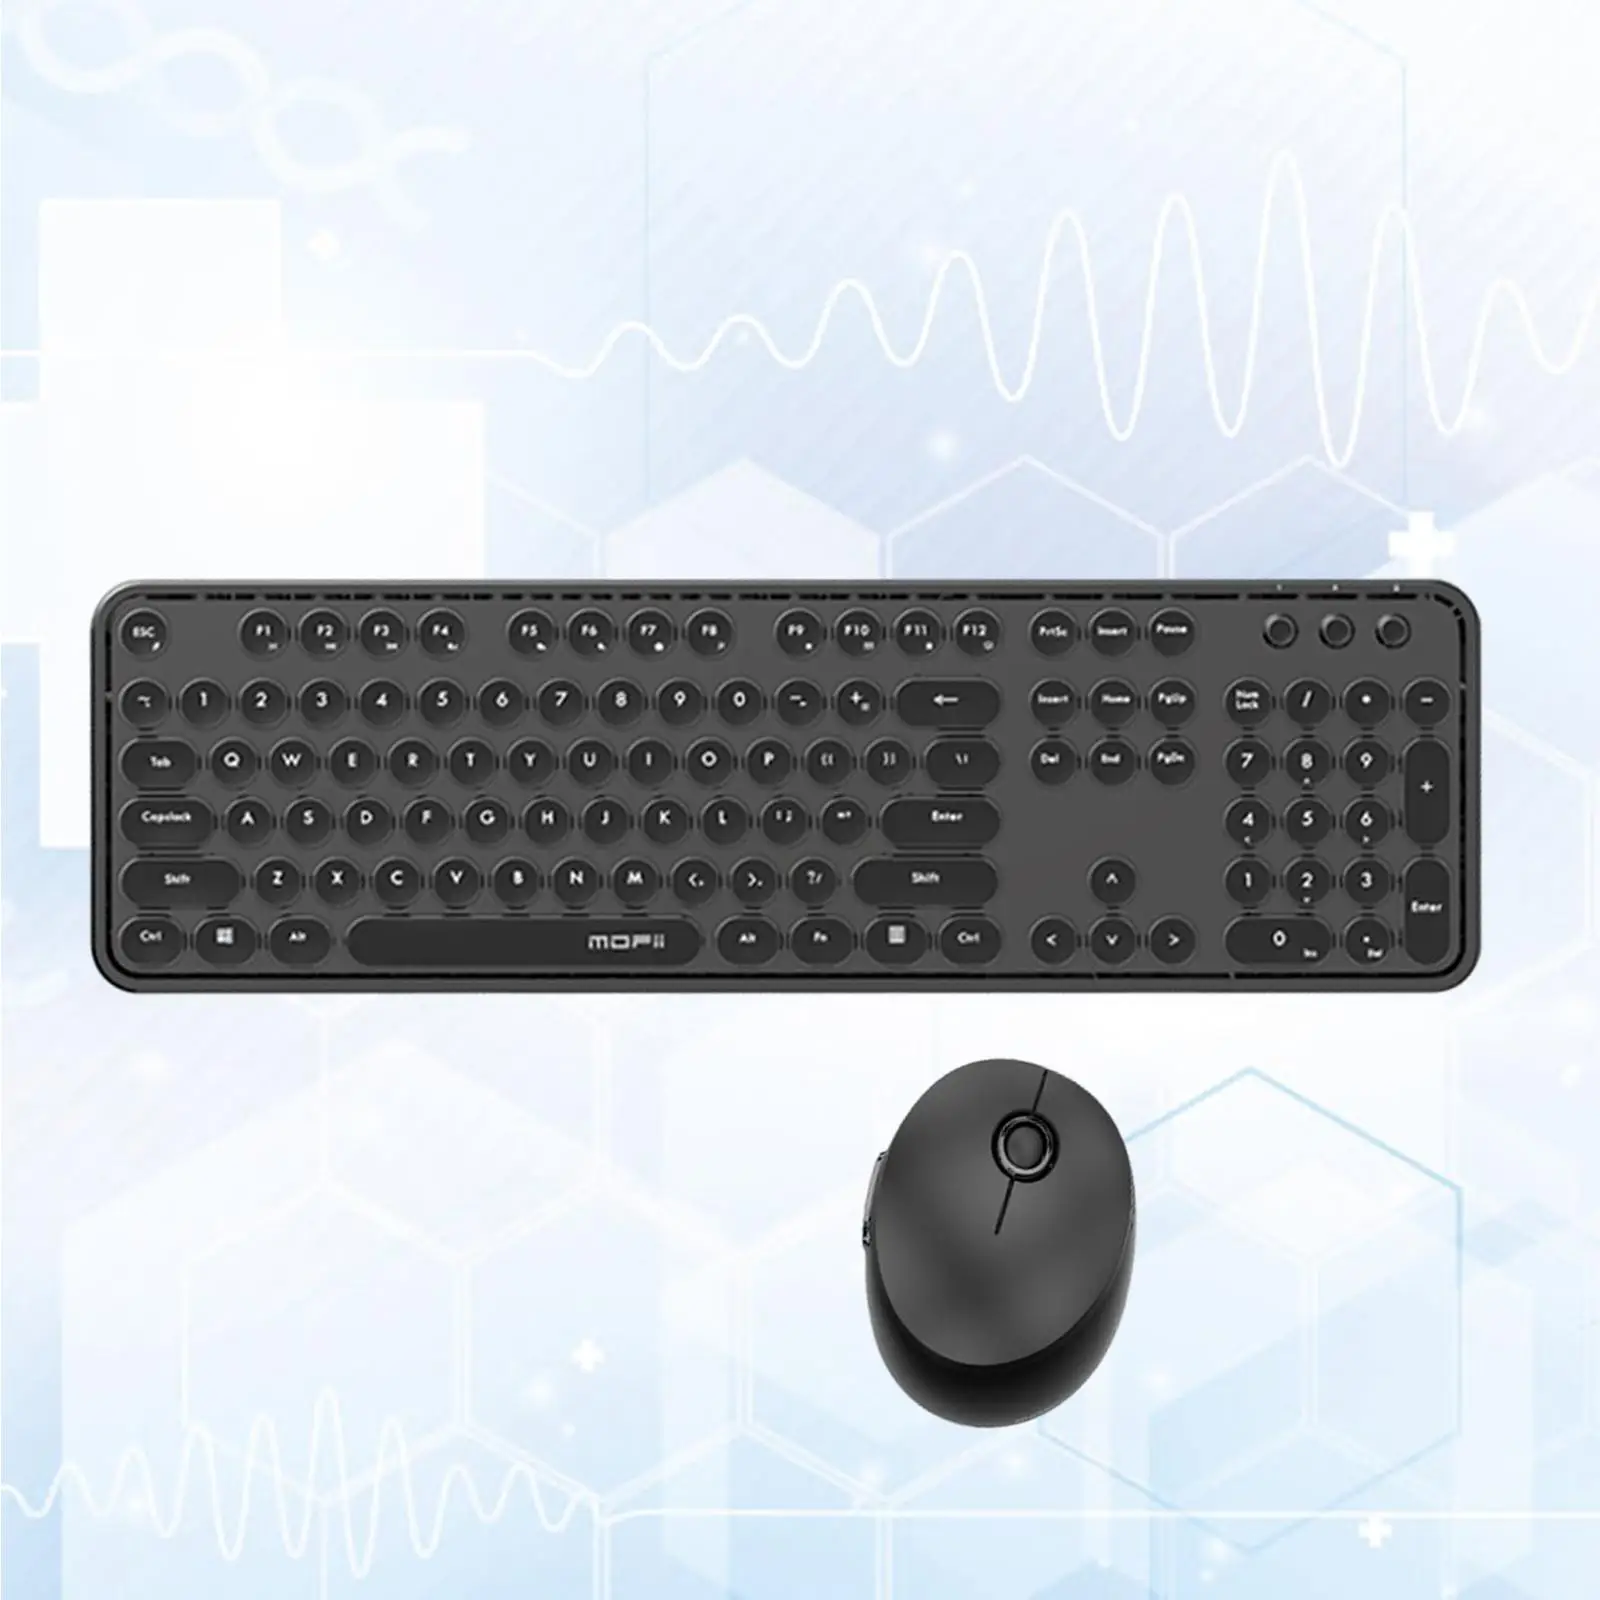  Wireless Keyboard and Mouse Kit Plug and Play, Silent click